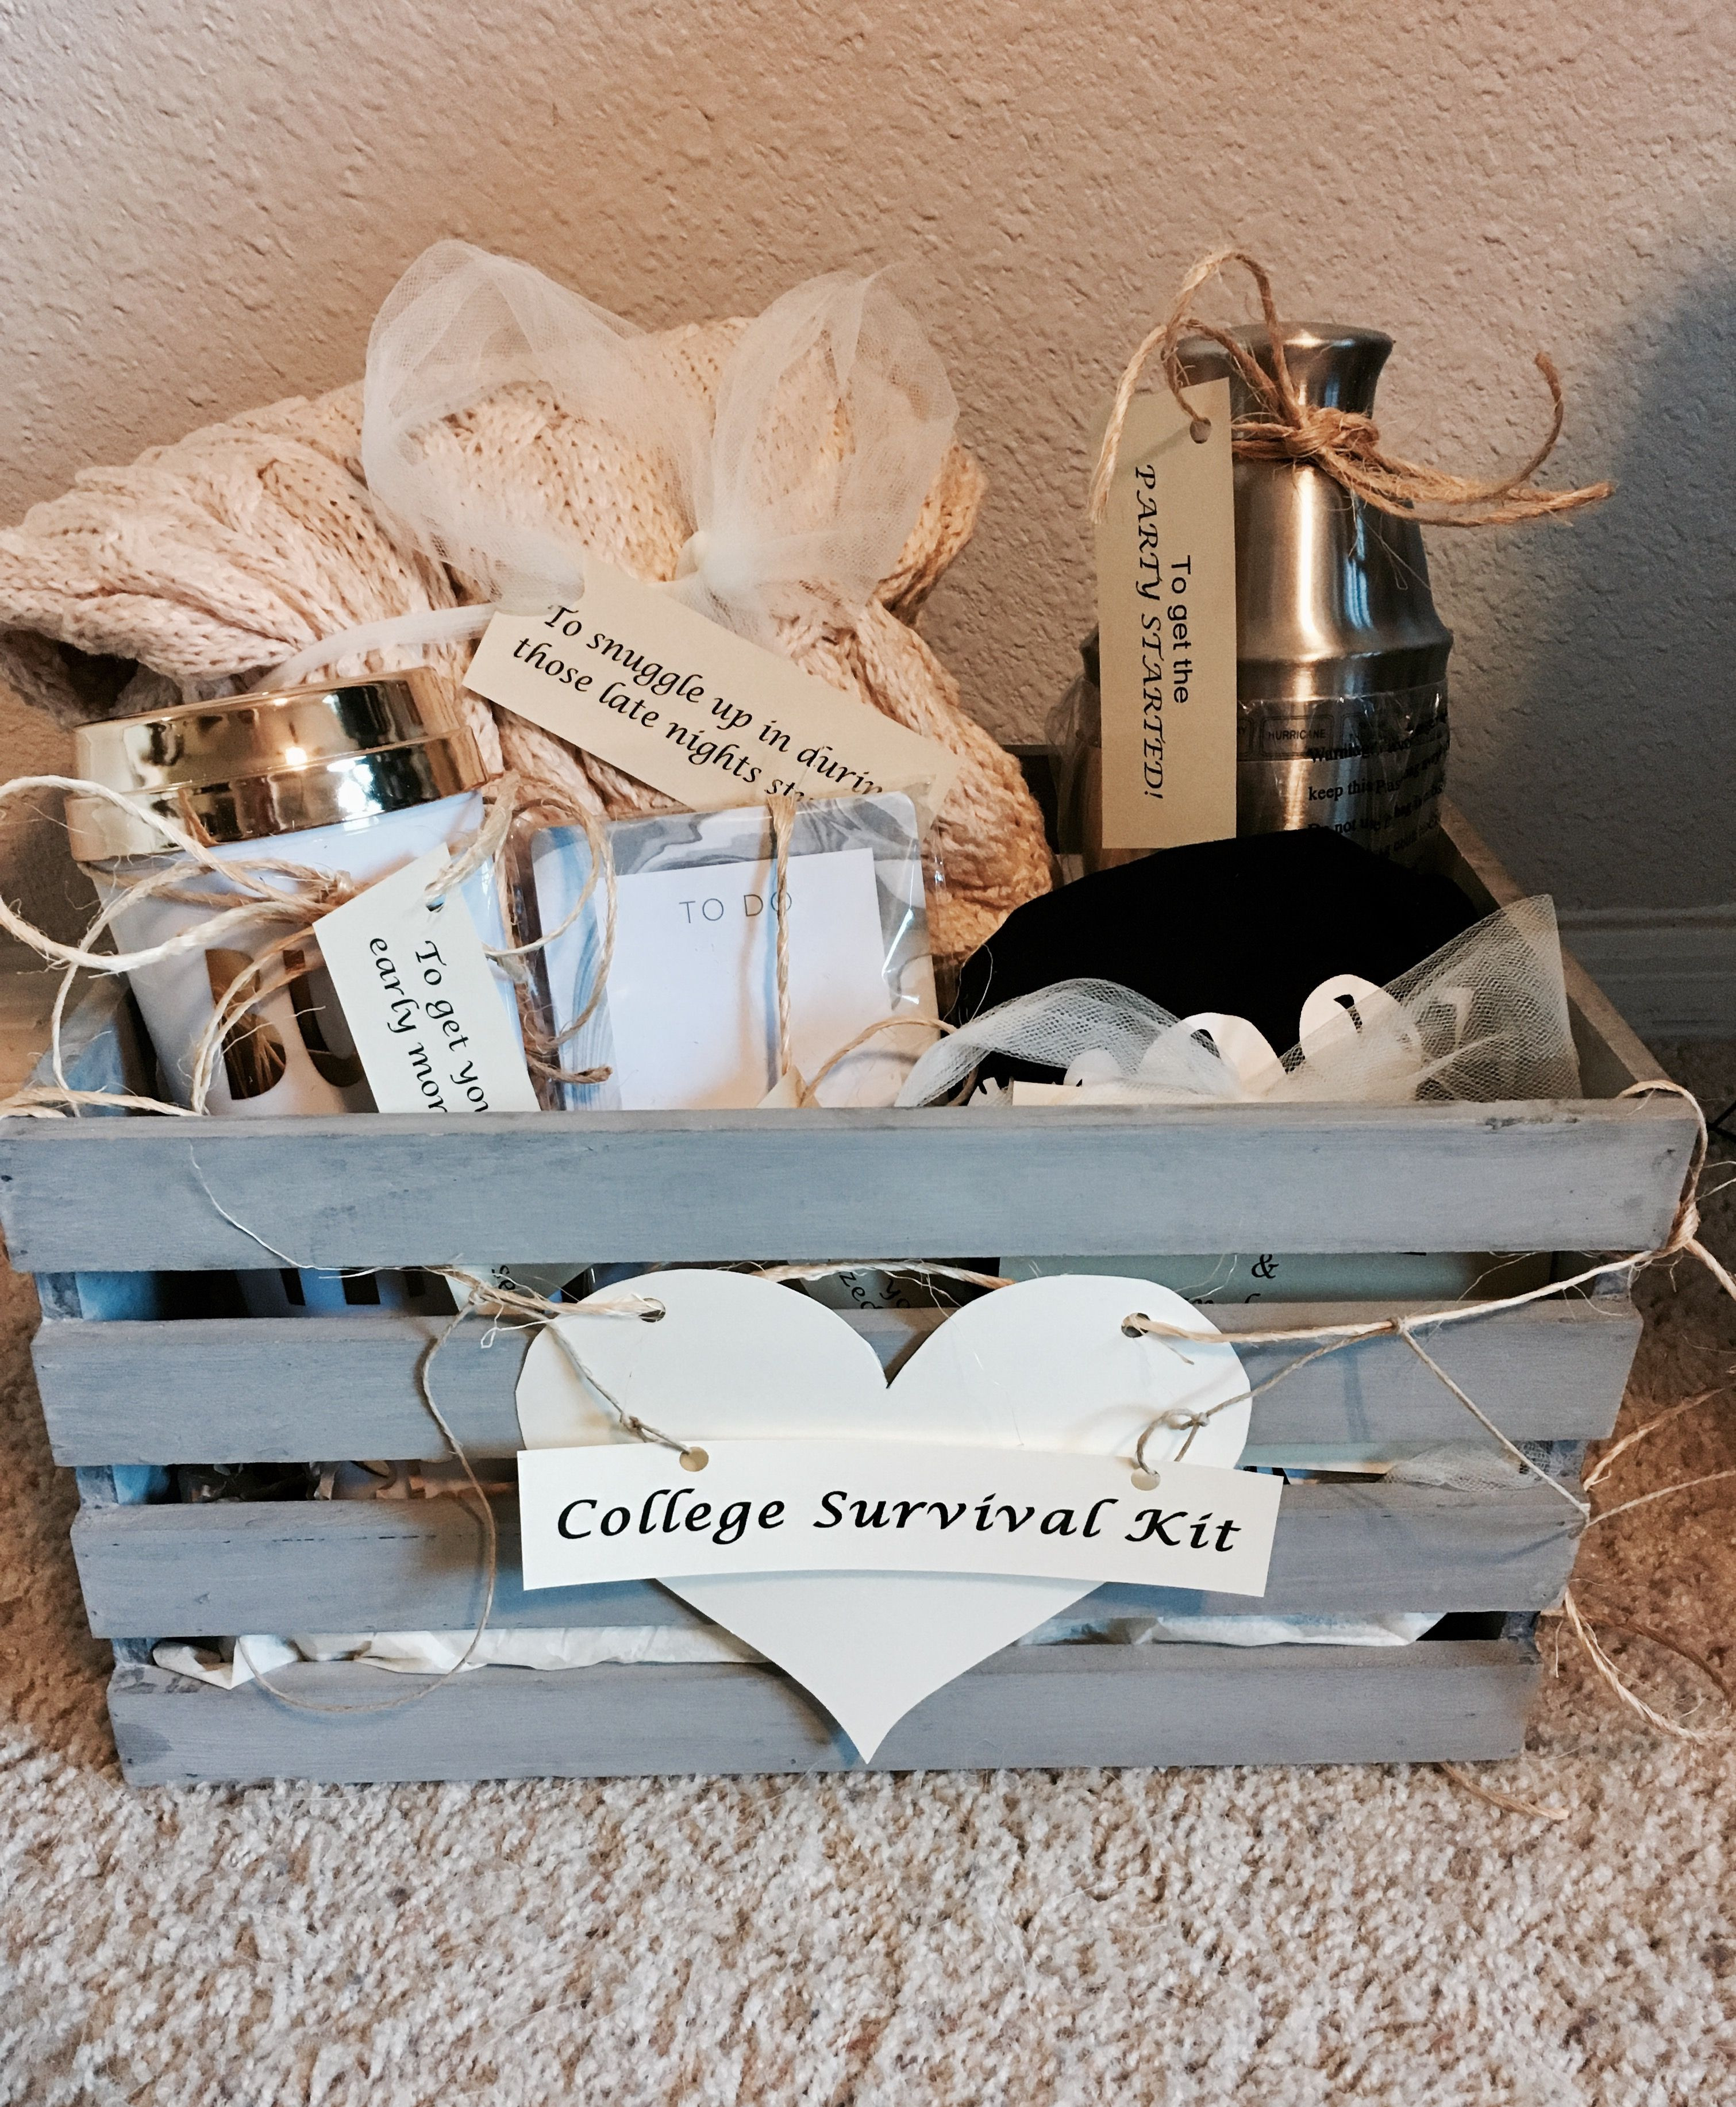 Graduation Gift Ideas For Sister
 "College Survival Kit" High School graduation t for my